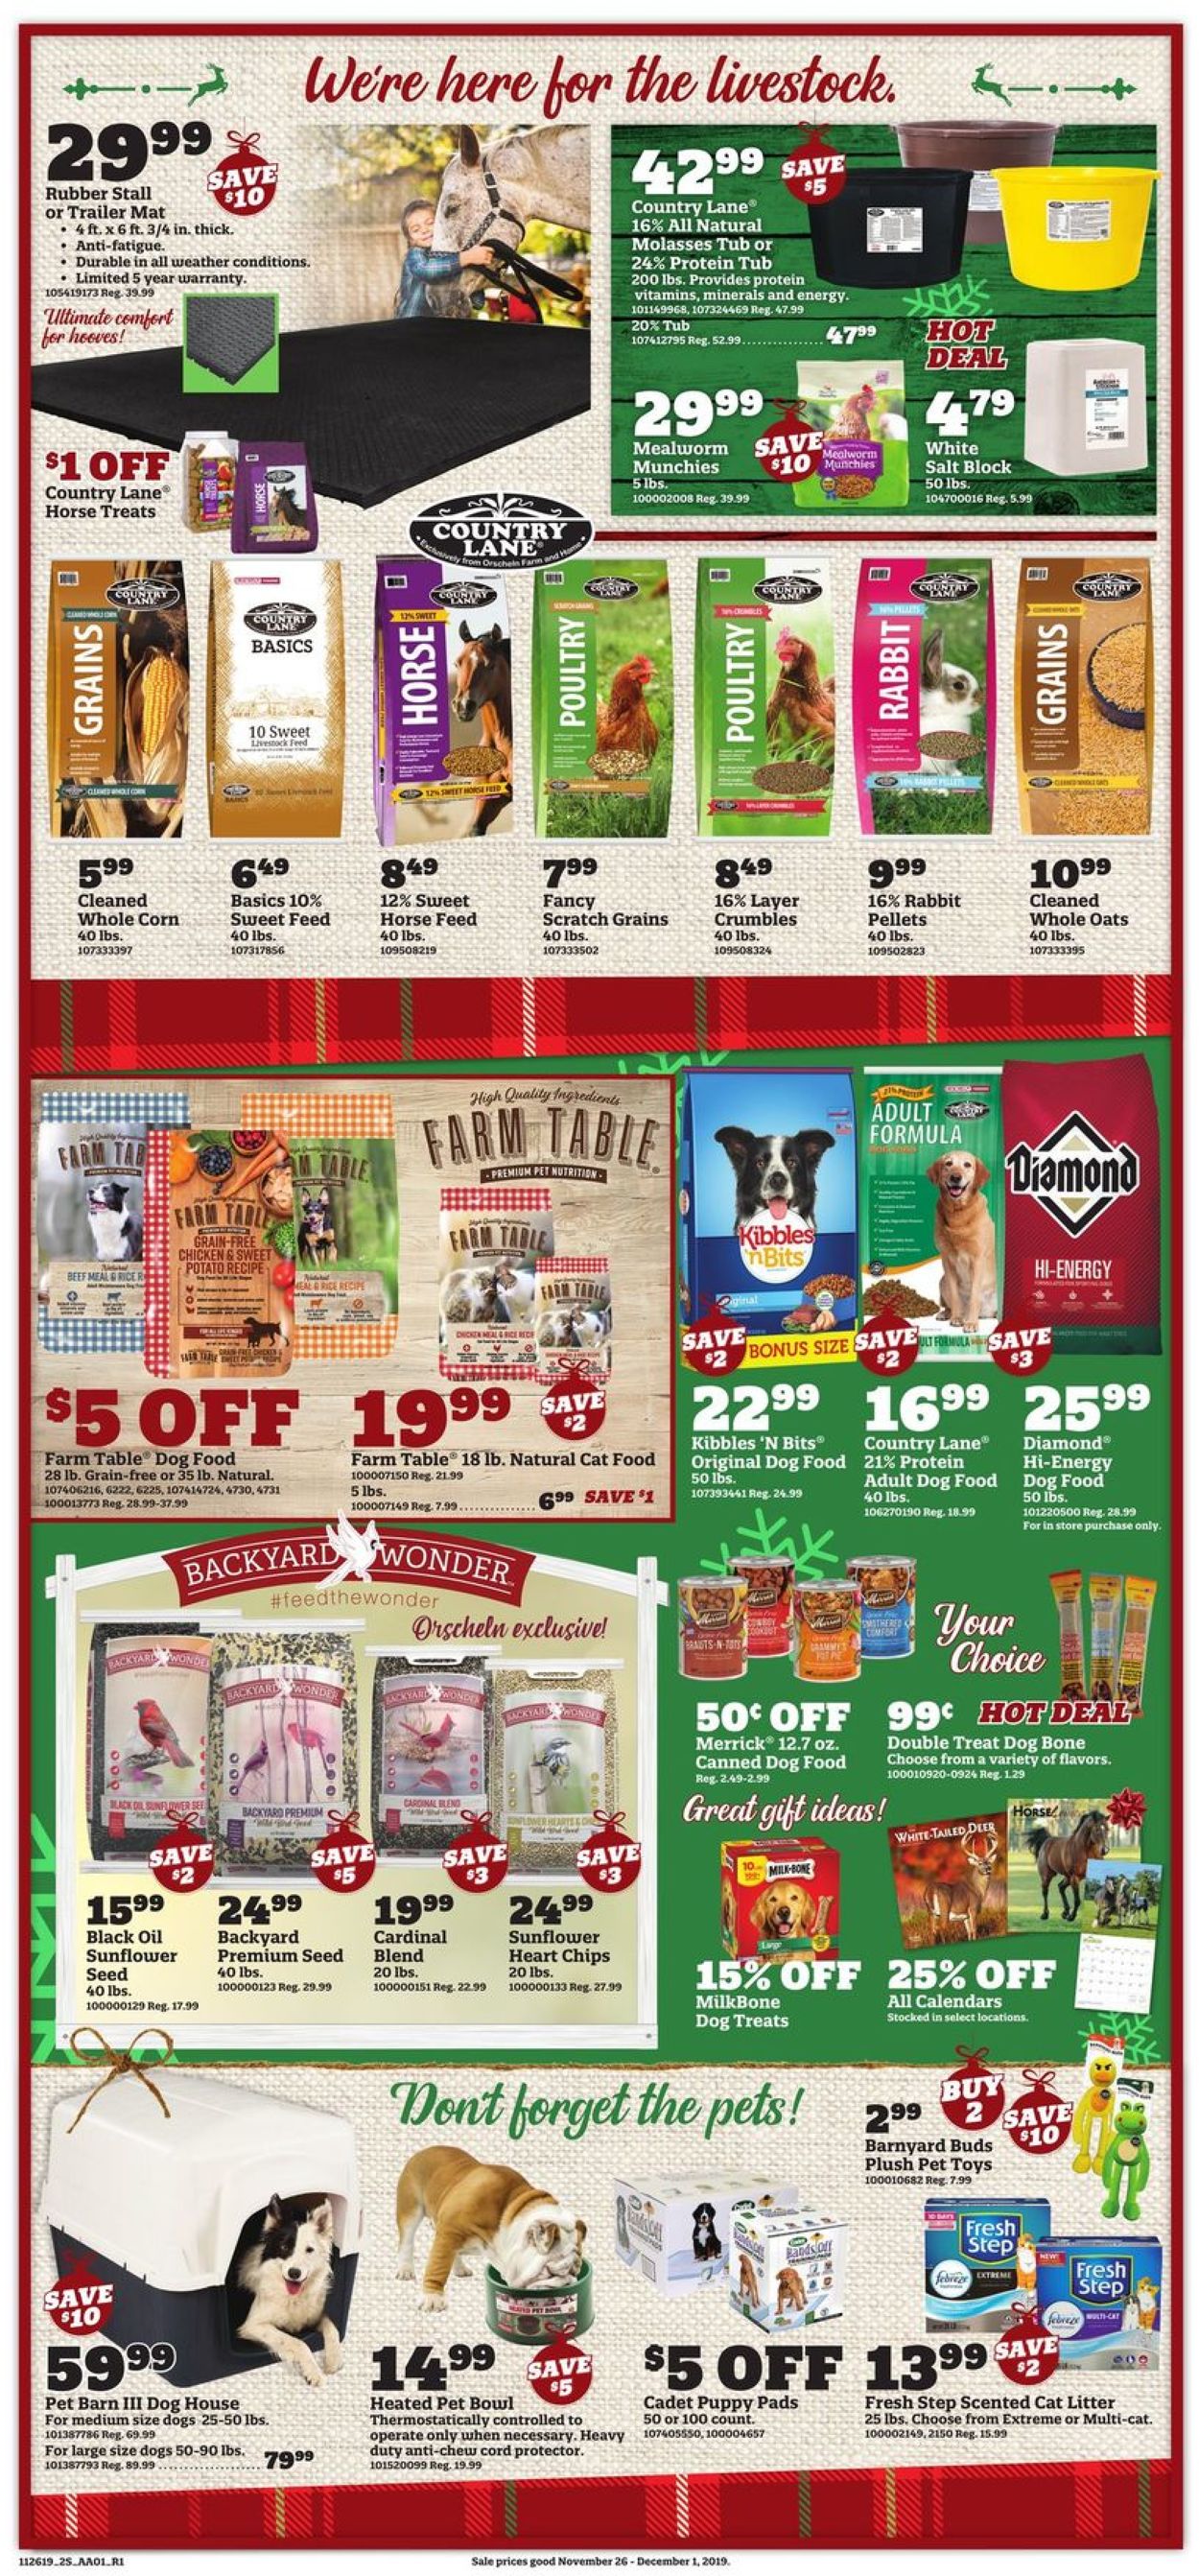 Catalogue Orscheln Farm and Home - Black Friday Ad 2019 from 11/26/2019